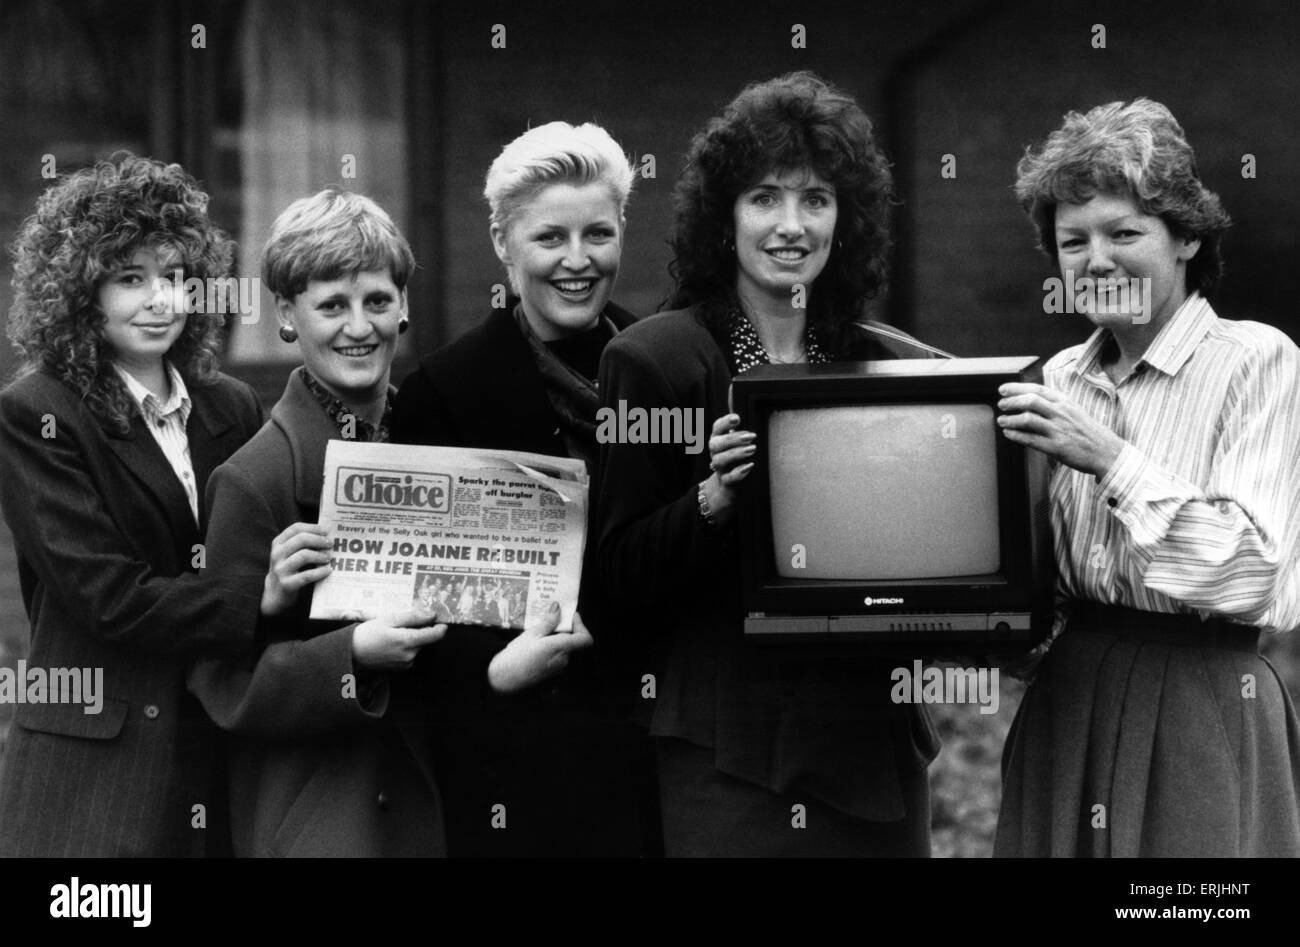 The 'Choice' advert girls present a colour TV to Sally Day, Director of the Acorns Children's Hospice, Oak Tree Lane, Selly Oak, Birmingham, 15th December 1988. Left to Right, Wendy De bie, Annie Davison, Lisa Brown, Jan Everitt. Reproduction Prohibited without the Written Consent of the Management Stock Photo